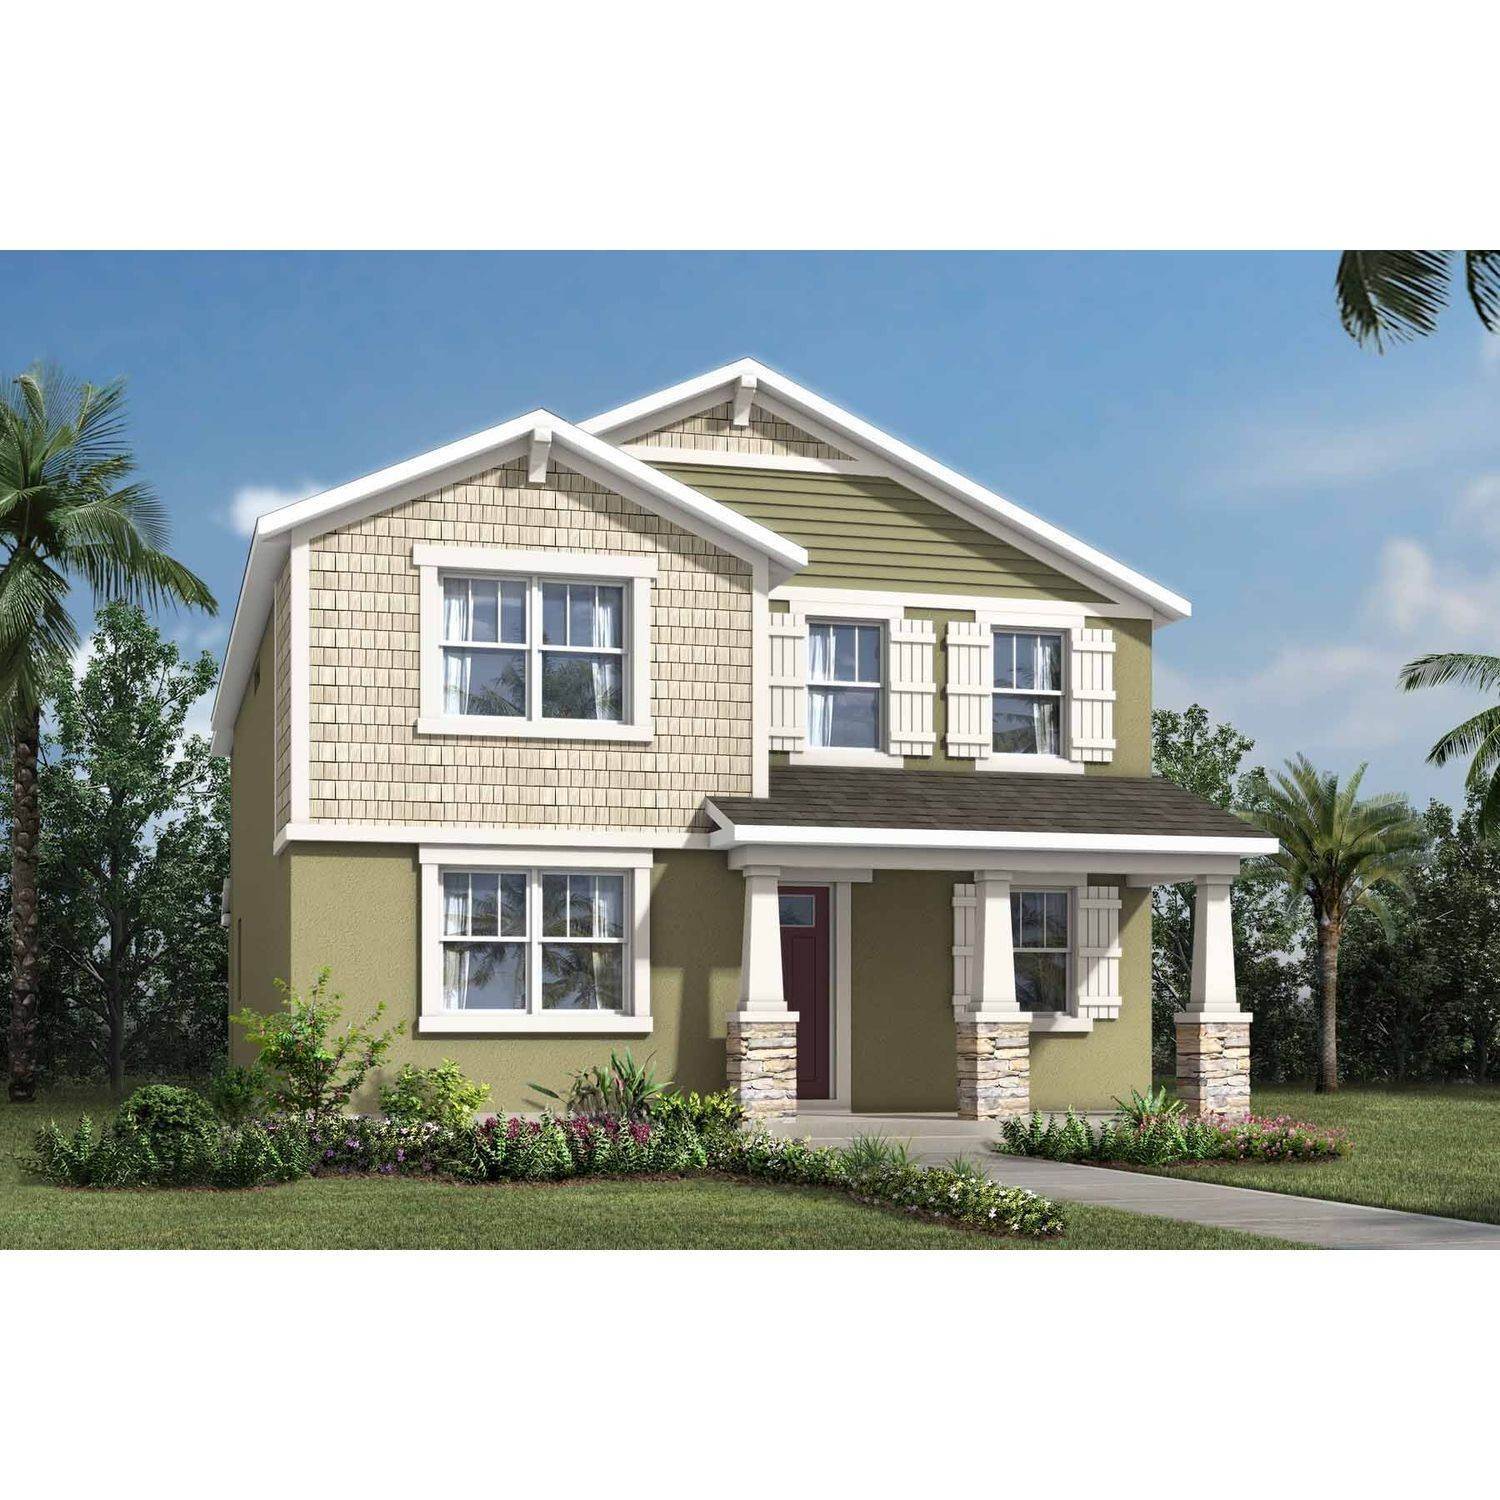 Single Family for Sale at Orlando, FL 32832